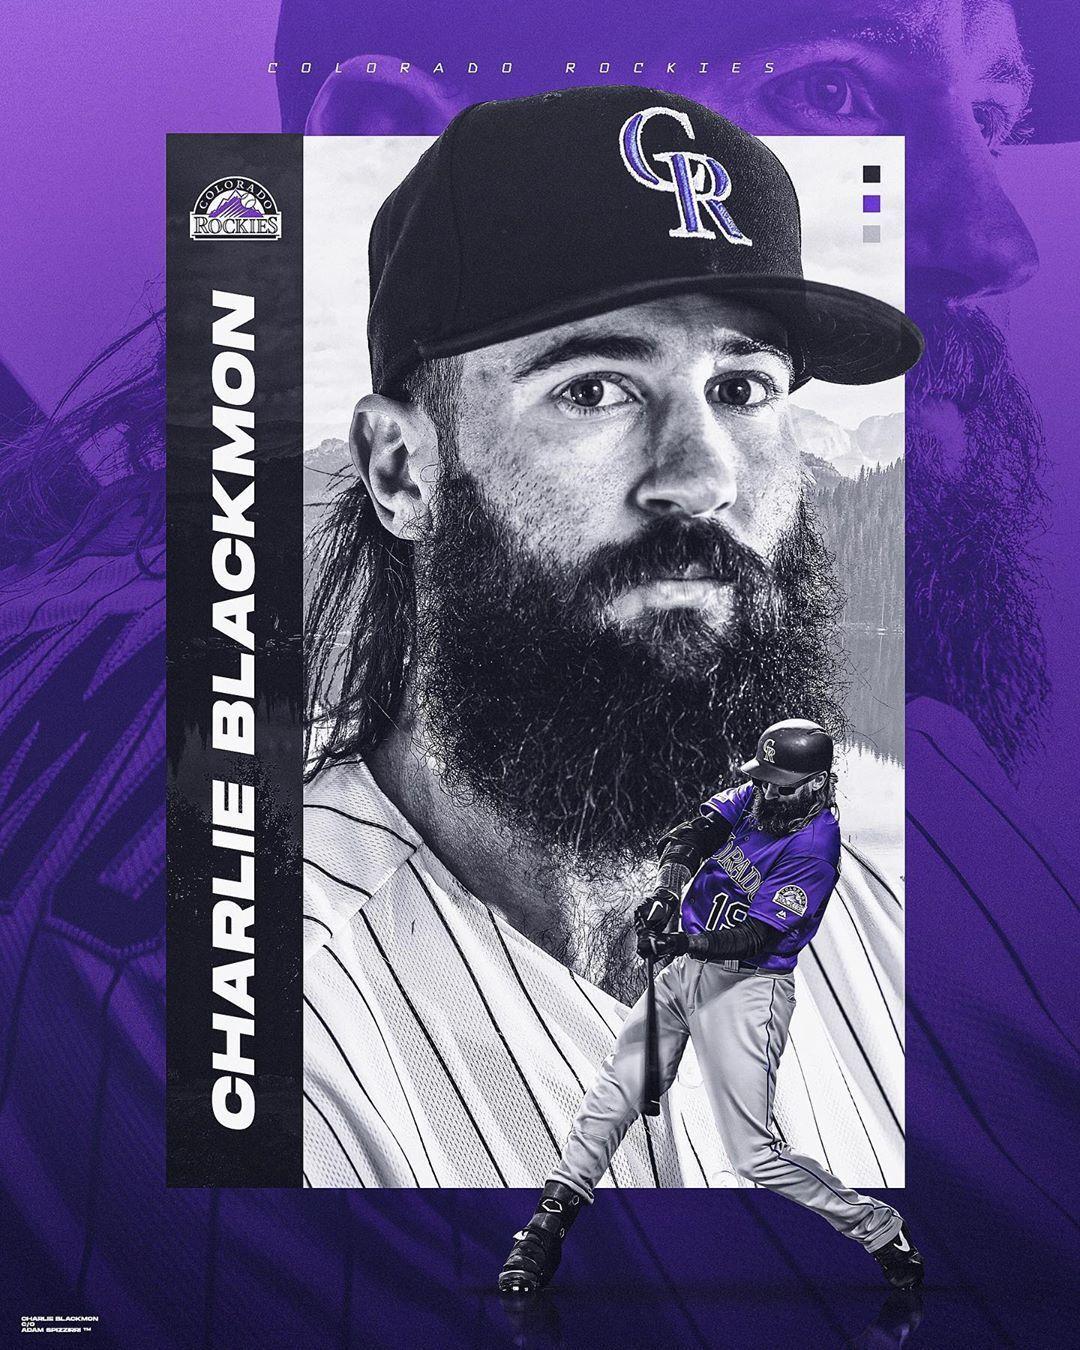 Charlie Blackmon wallpaper by Nails5547 - Download on ZEDGE™